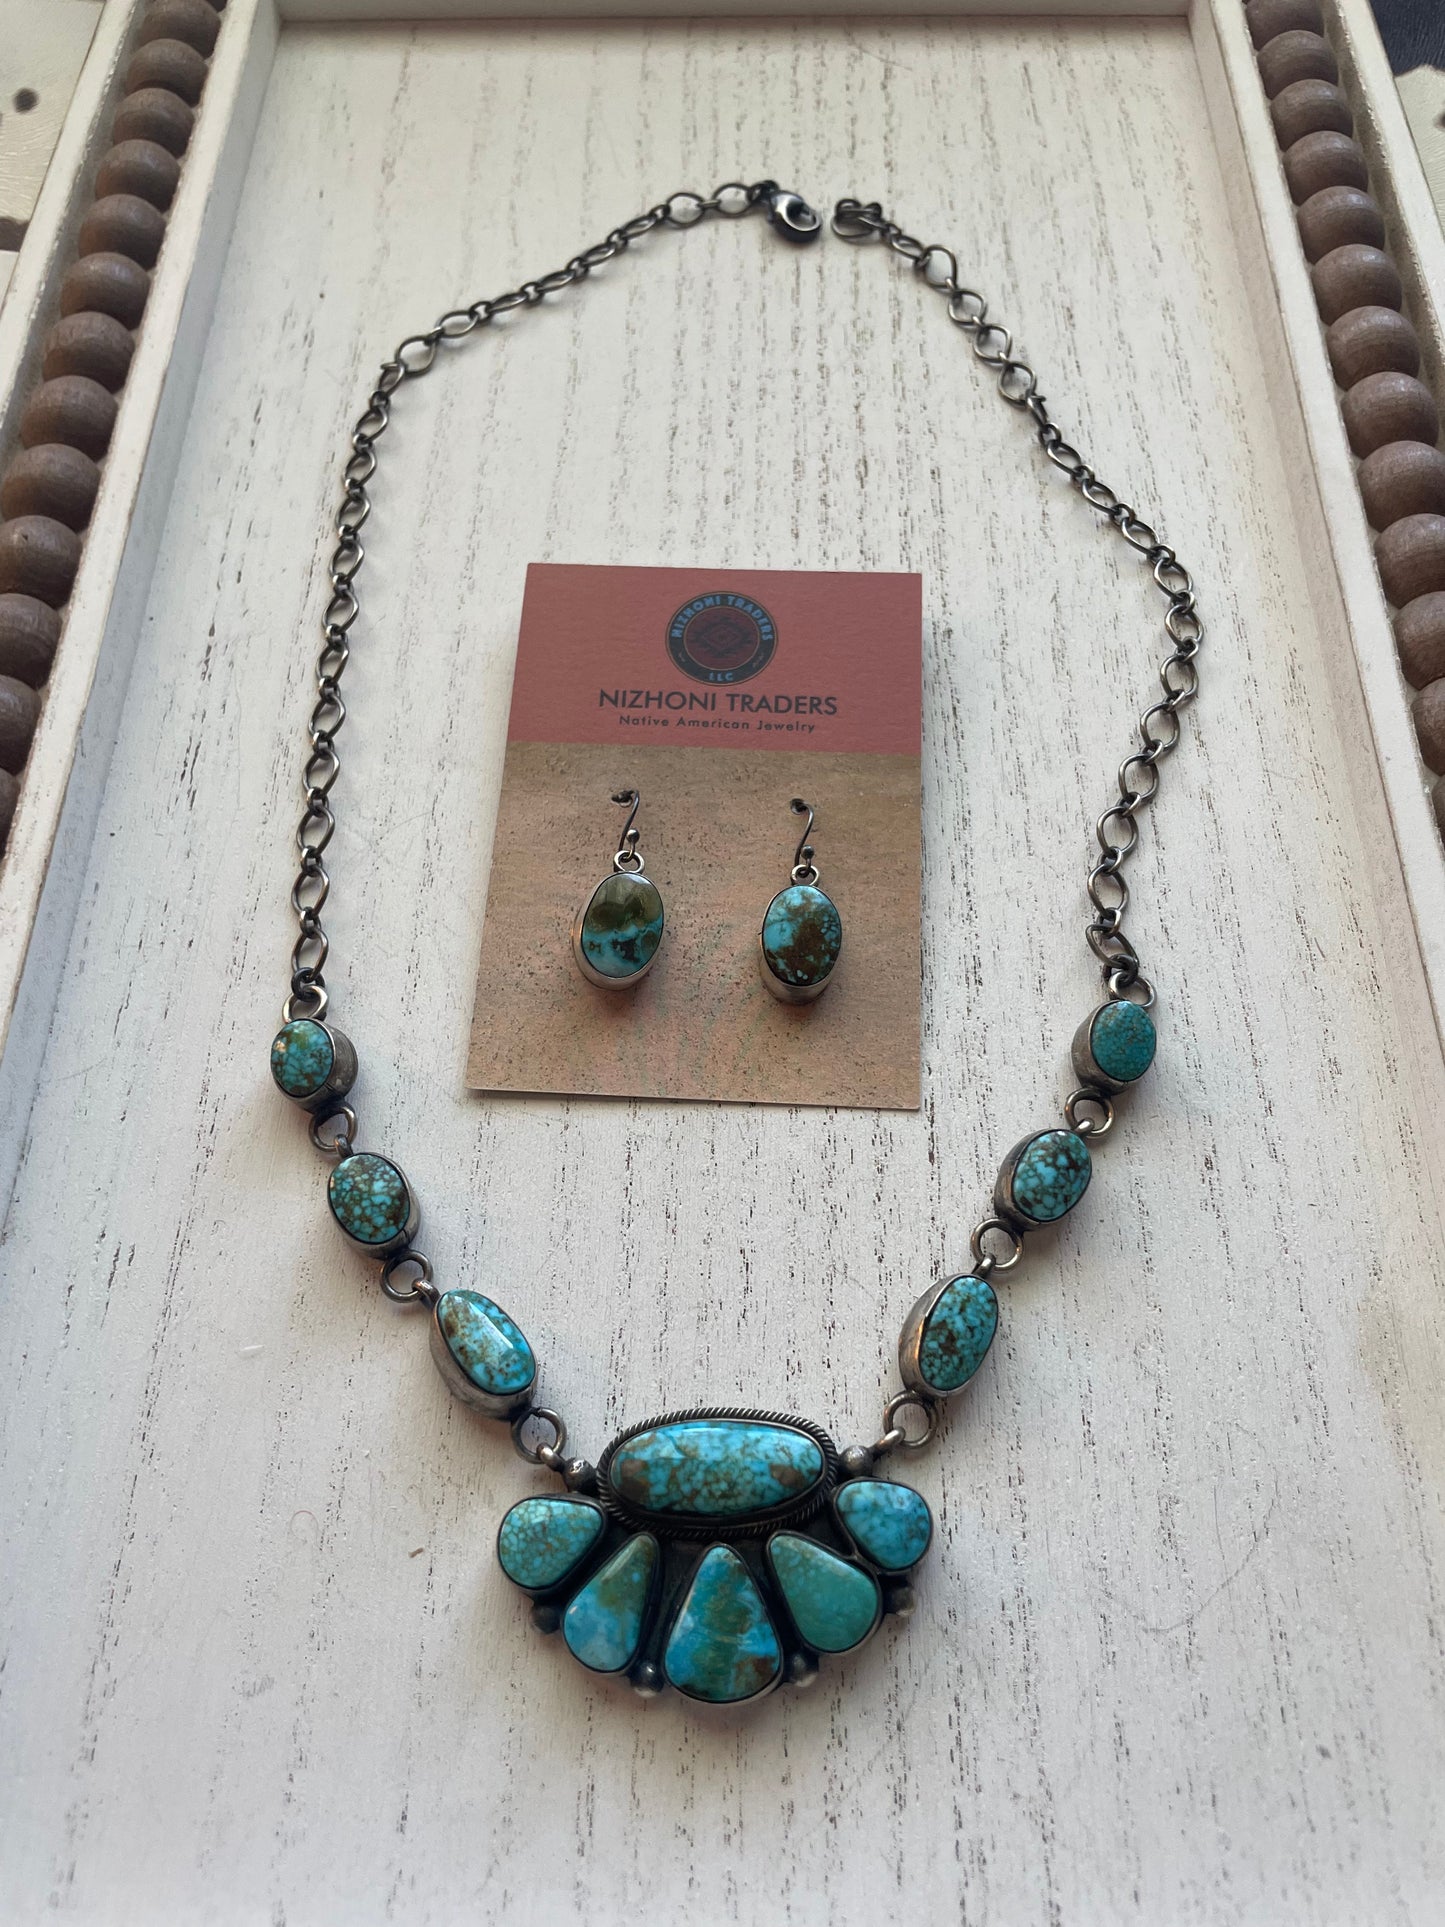 Beautiful Navajo Sterling Silver Turquoise Necklace & Earring Set Signed B Johnson